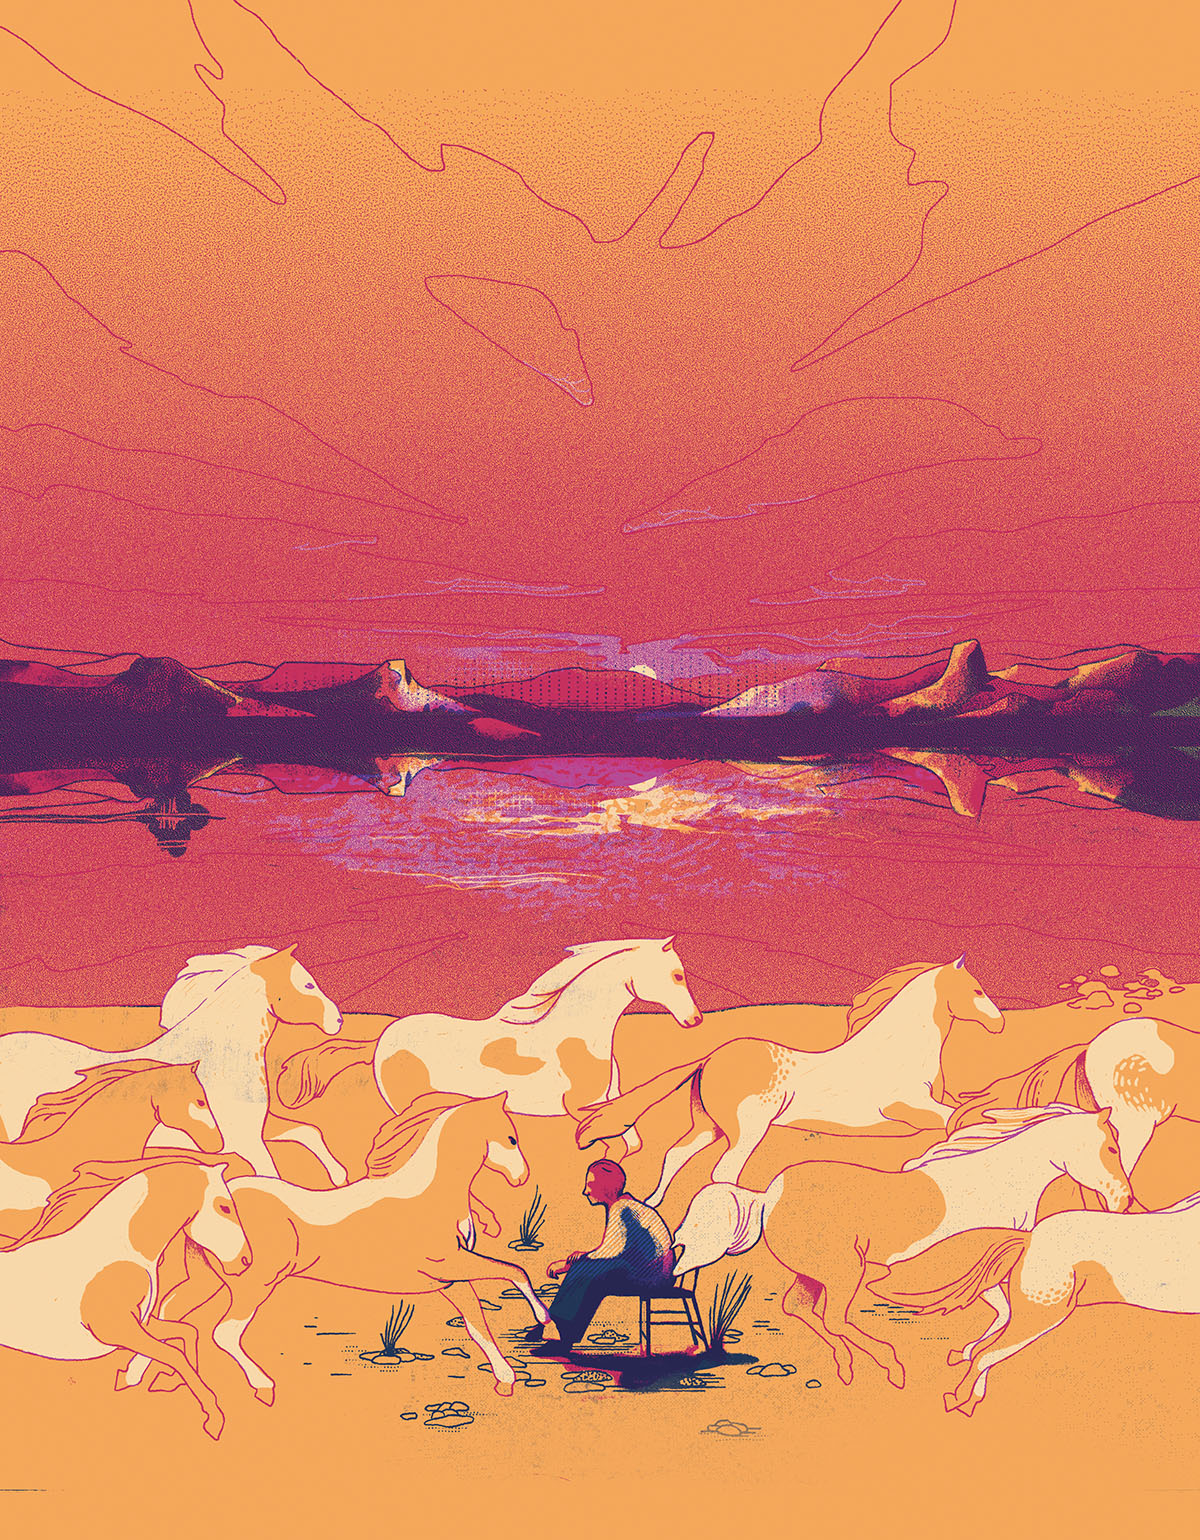 An illustration of a group of horses on a sunset scene